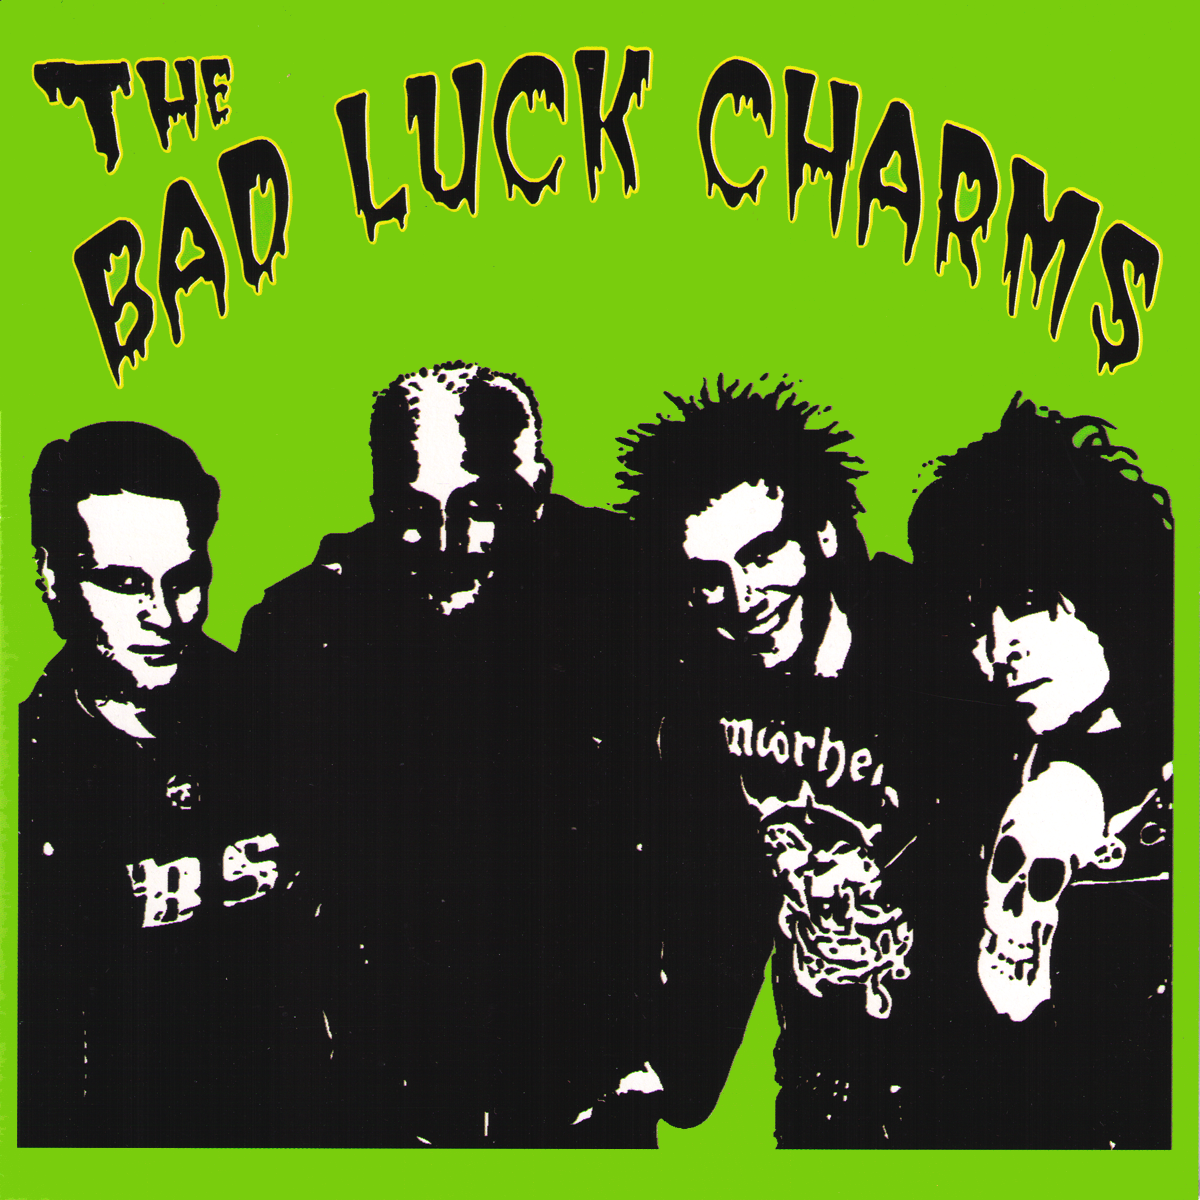 Bad Luck Charms- Rich Girl 7” ~W/ KERRY OF US BOMBS!